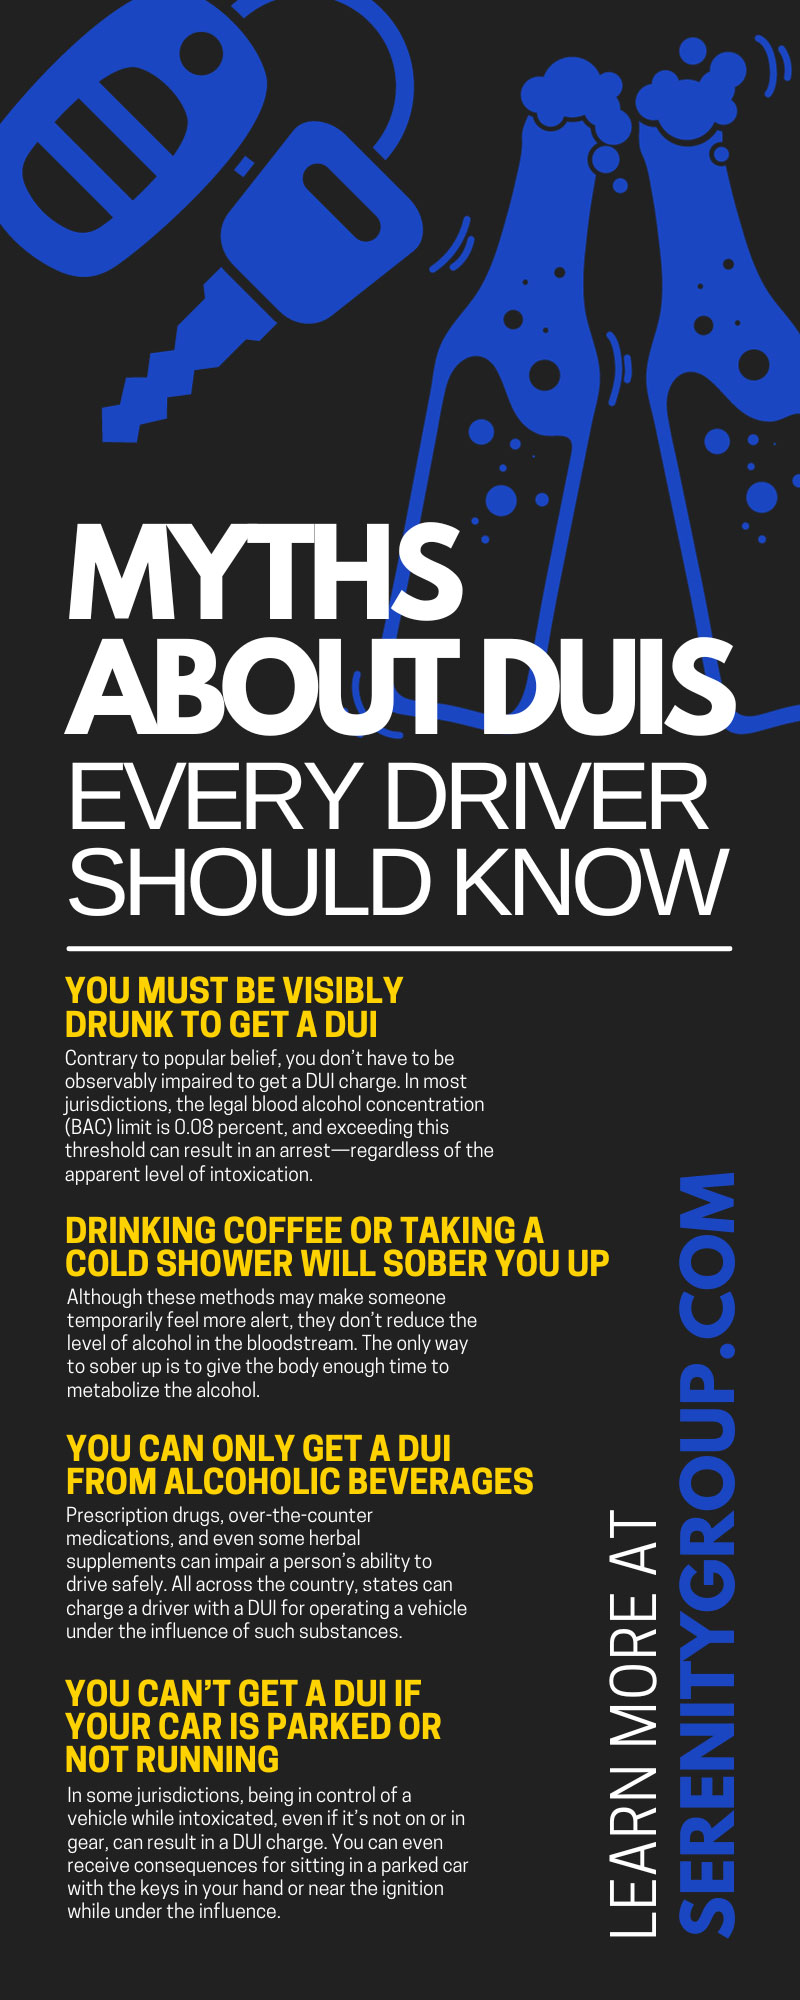 15 Myths About DUIs Every Driver Should Know